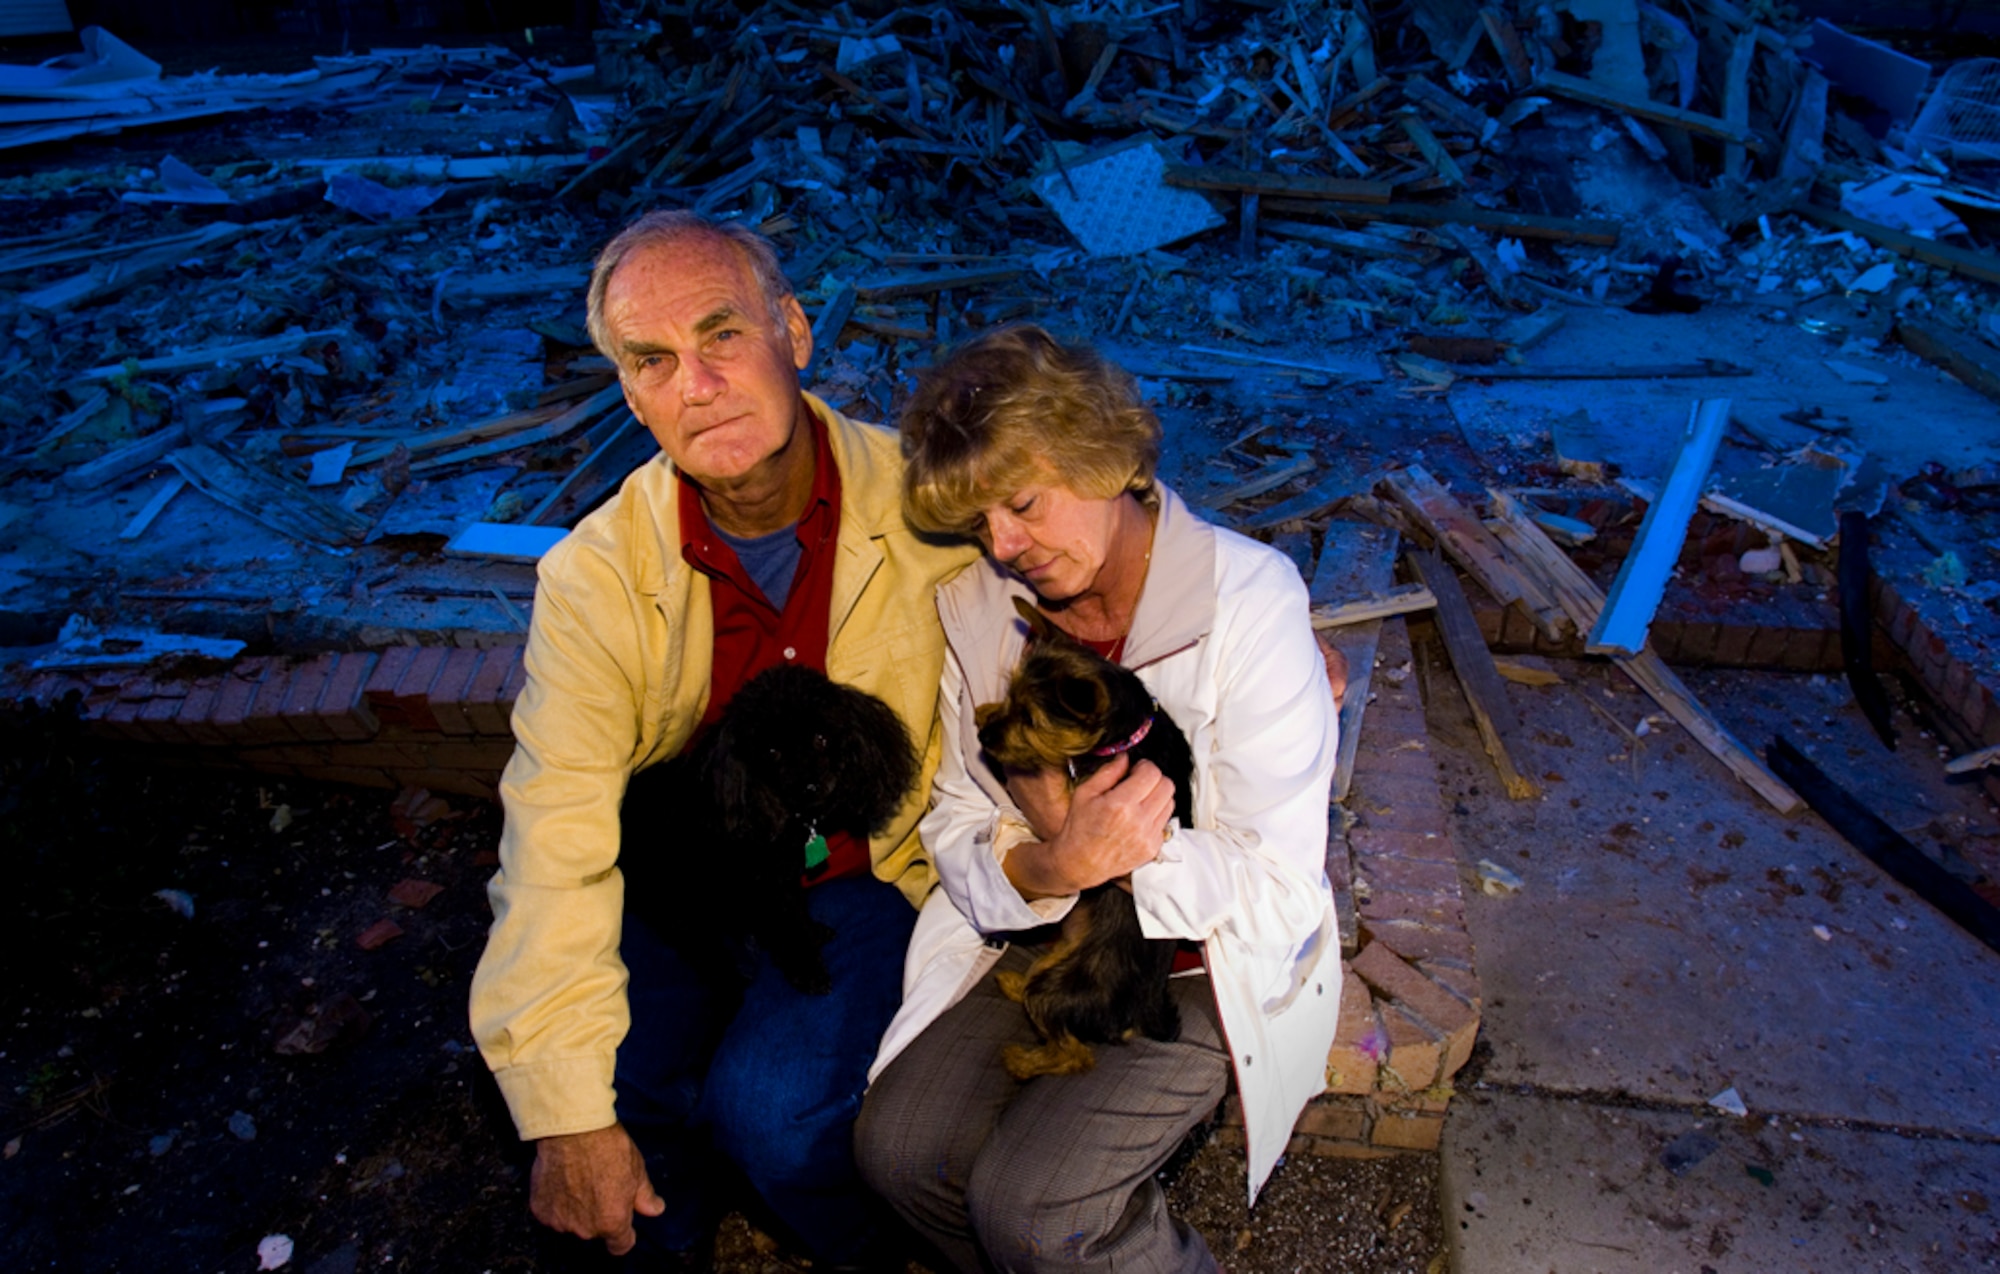 With their dream home reduced to a nightmarish rubble, Wayne and Ilah Glover, with their dogs Bailey and Izzie, say they will rebuild, a process that could take up to nine months. (Photo by Tech. Sgt Matthew Hannen)